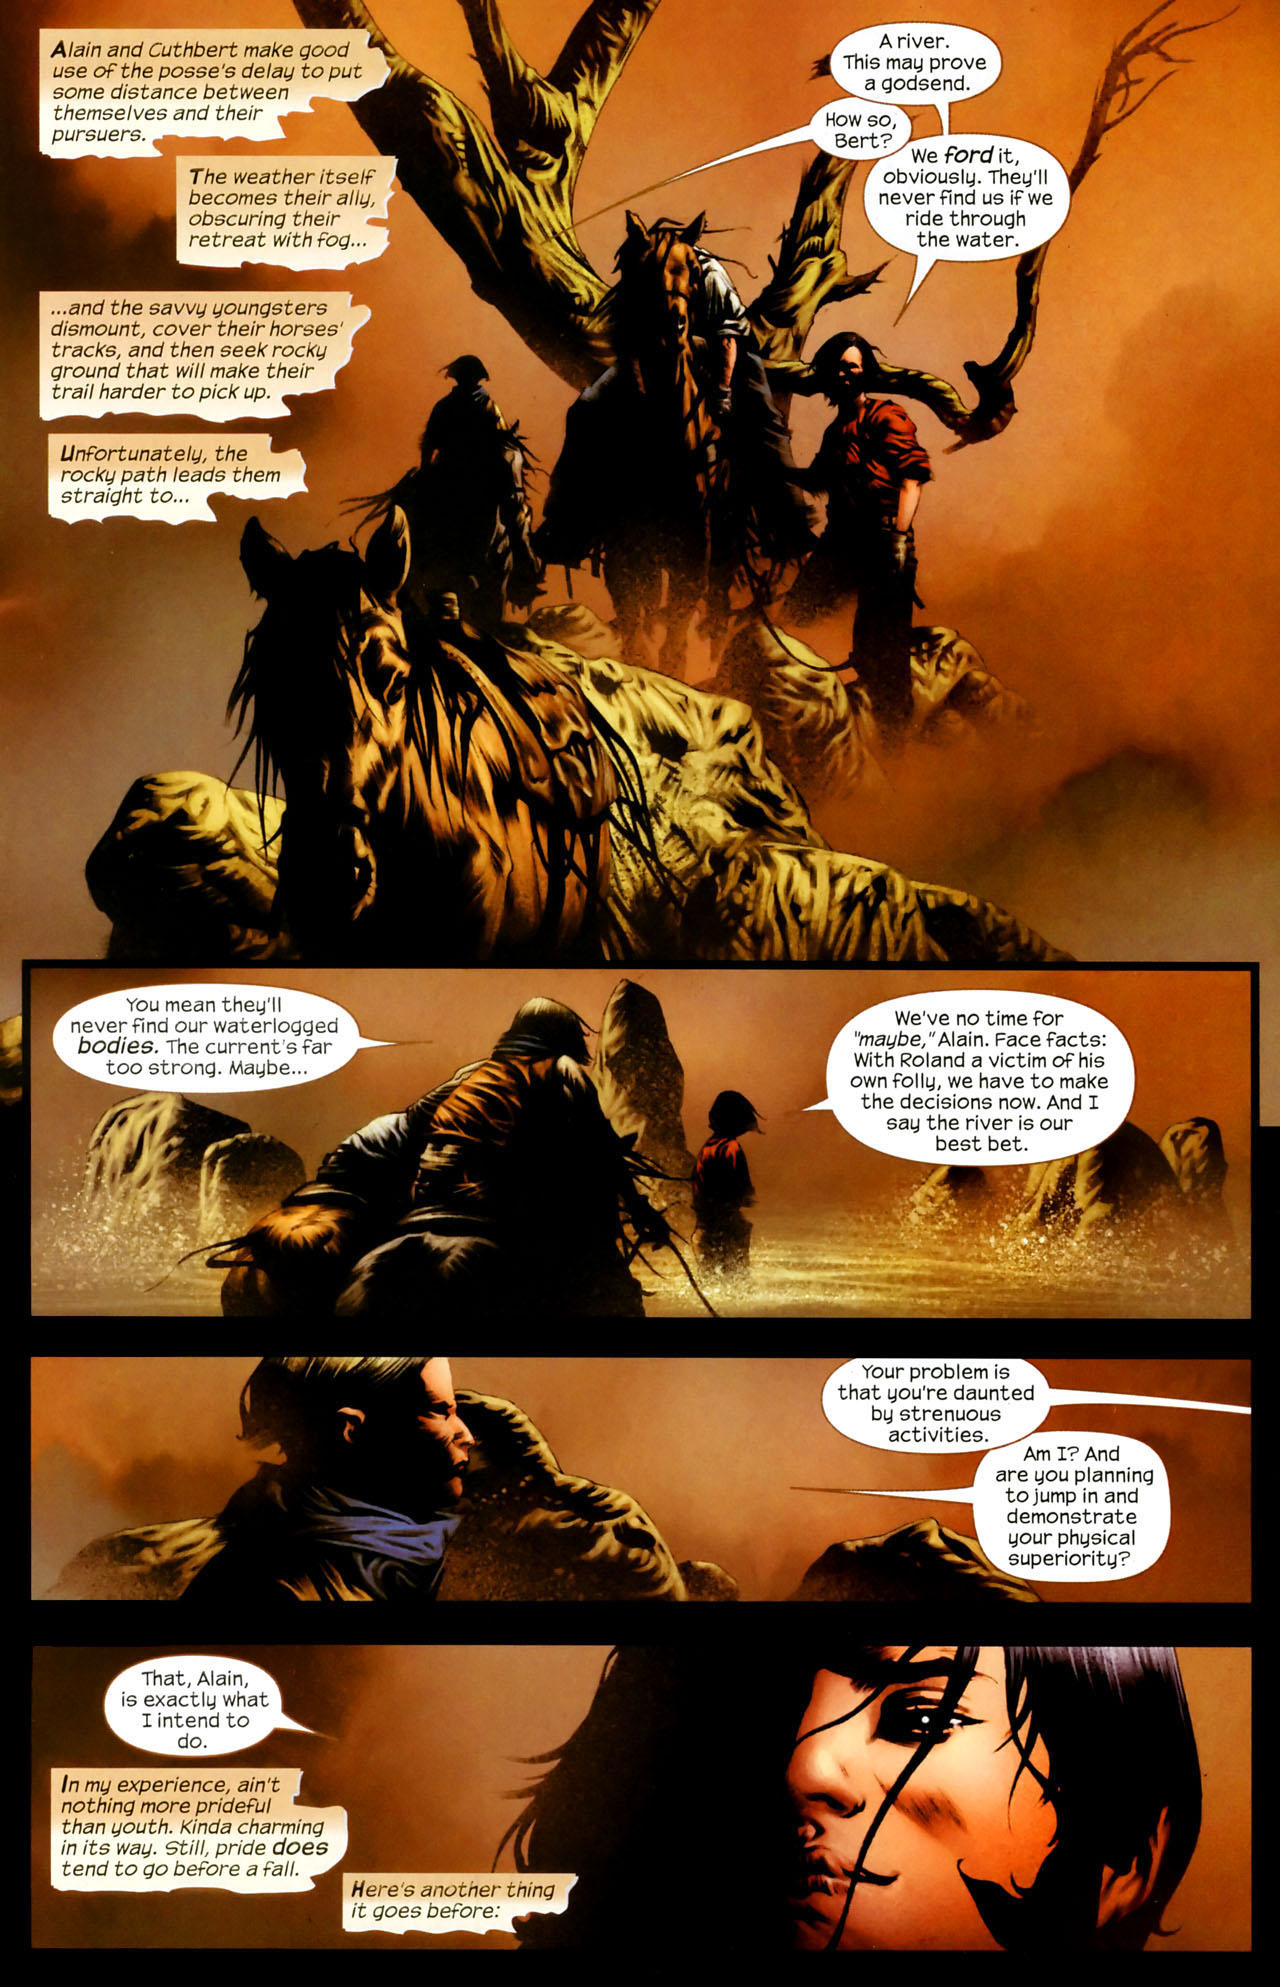 Dark Tower: The Long Road Home #1 - Part One